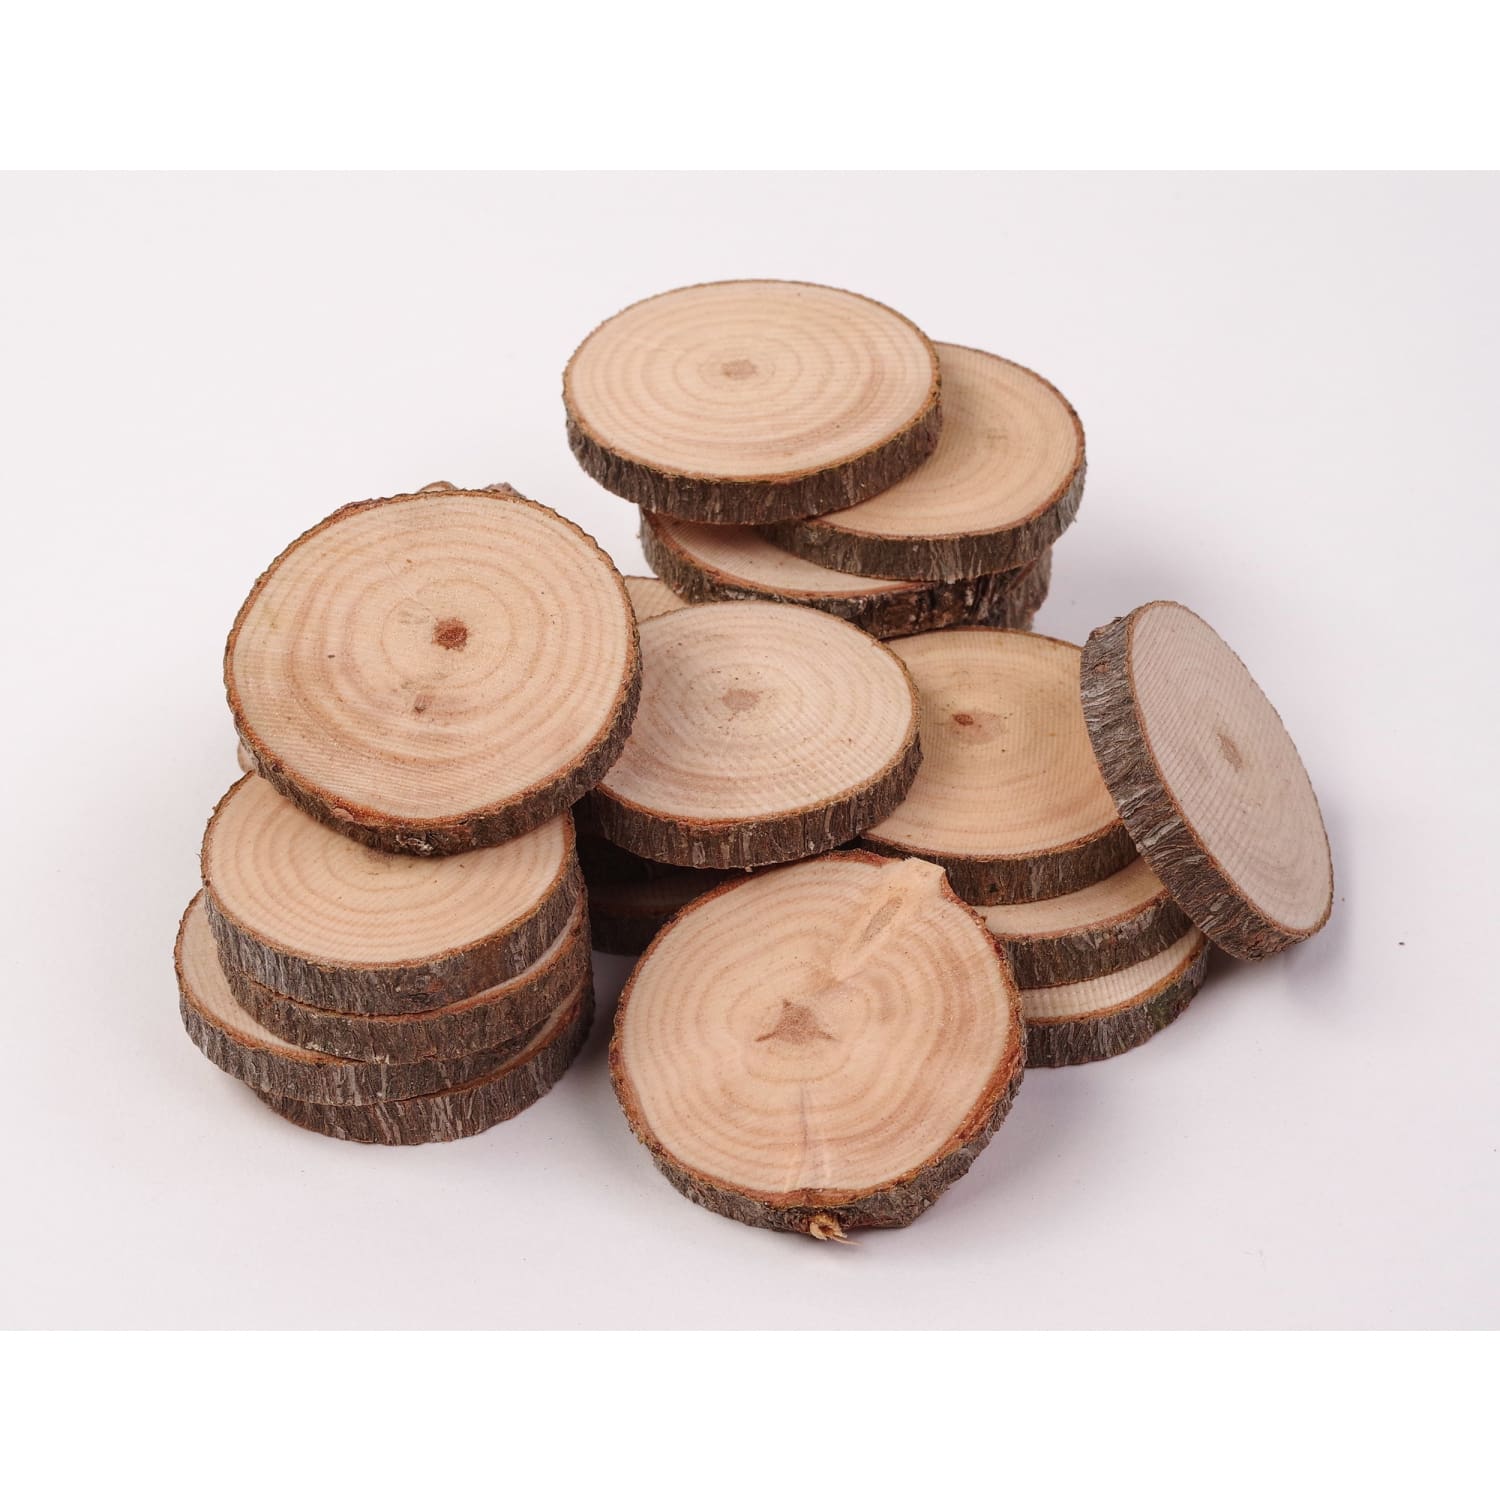 4 - 6 Cm Wood Slices (20 Pack) - Small Wood Slices